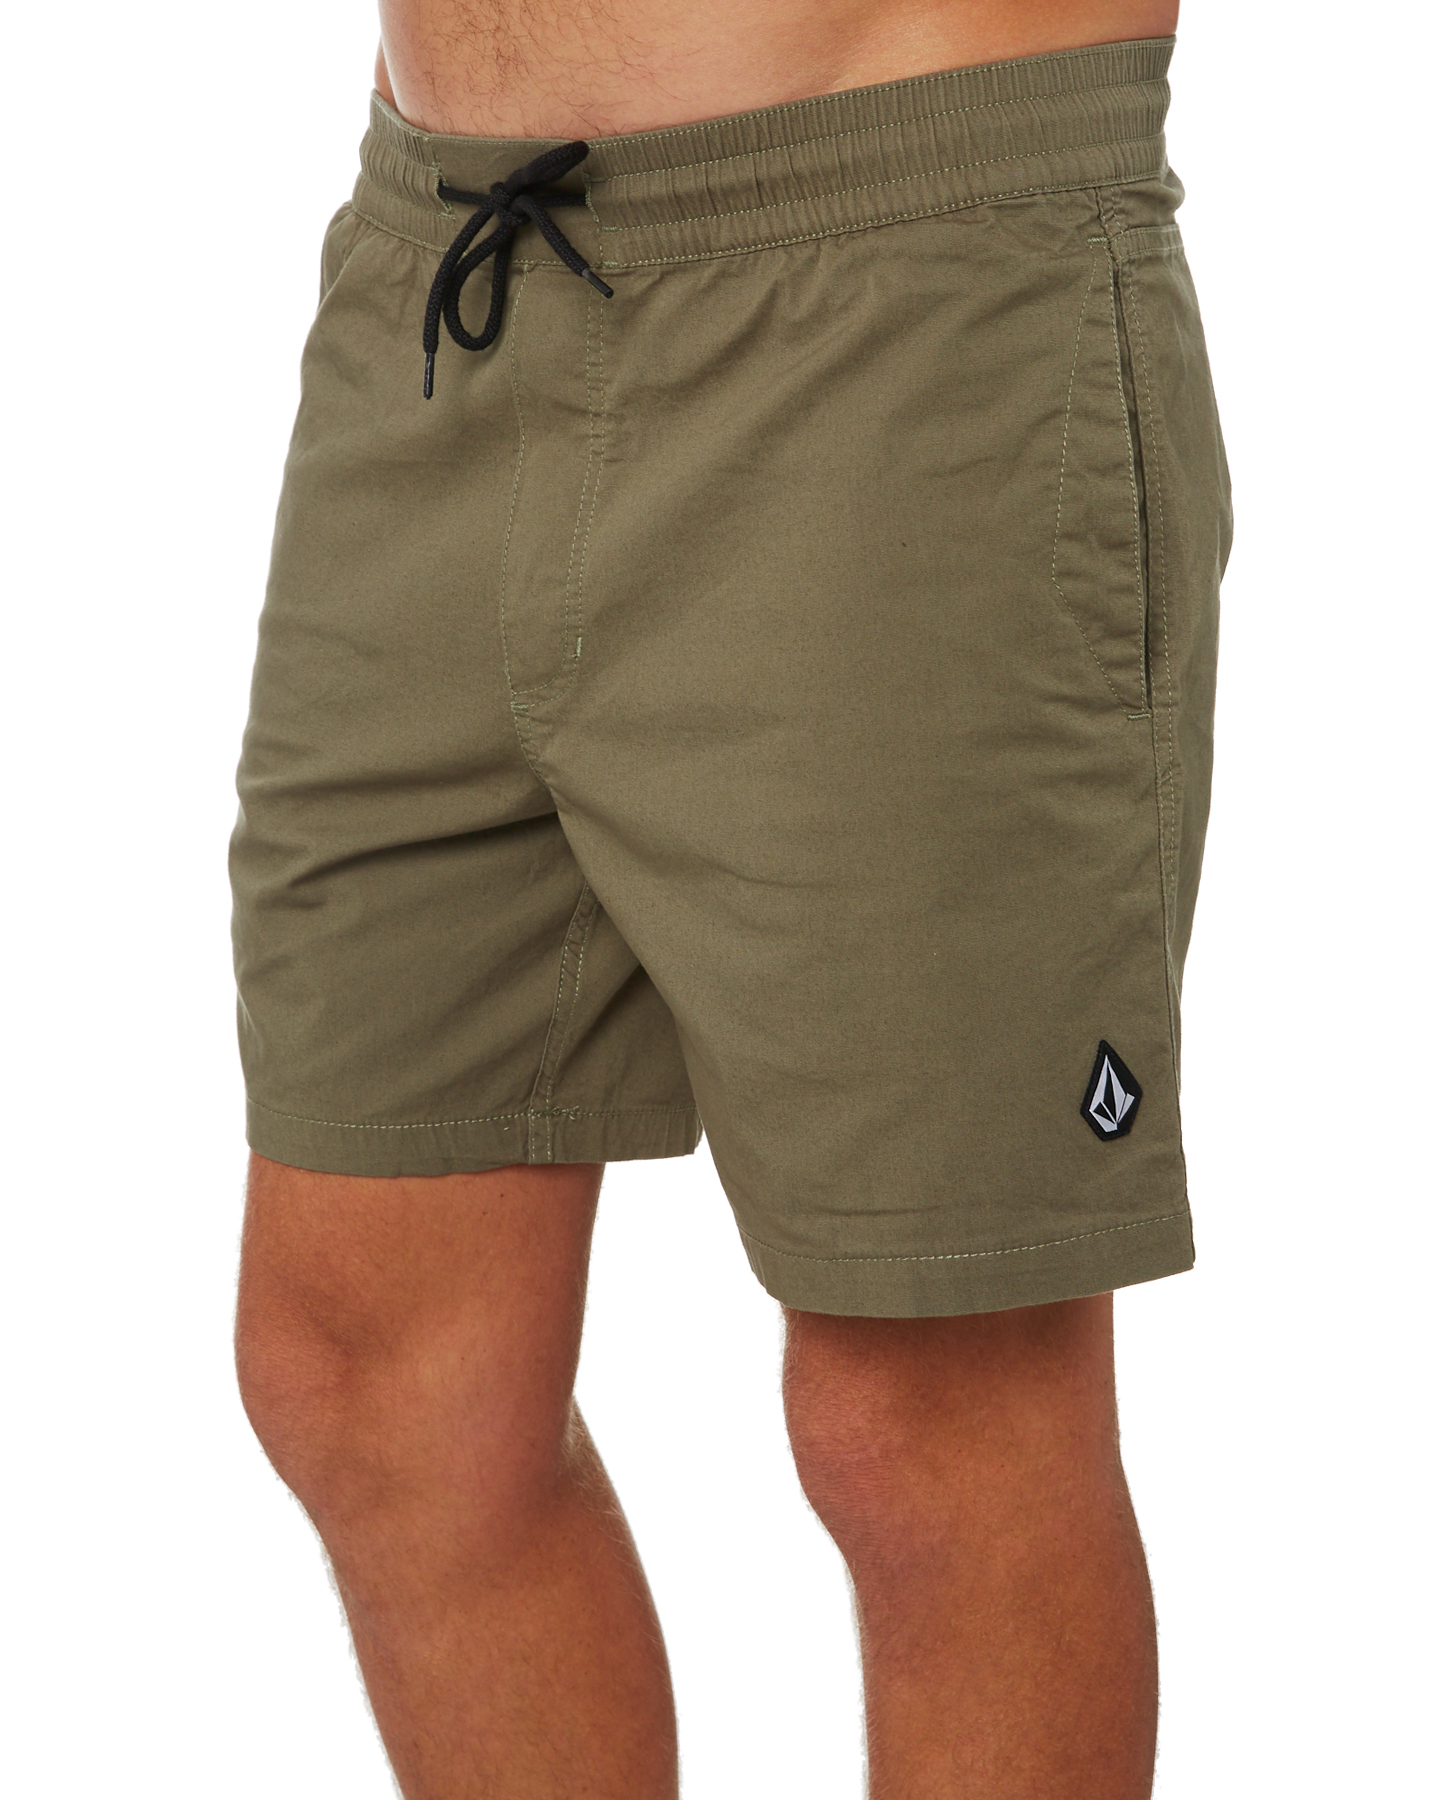 Where to find the Best Mens Shorts – Telegraph